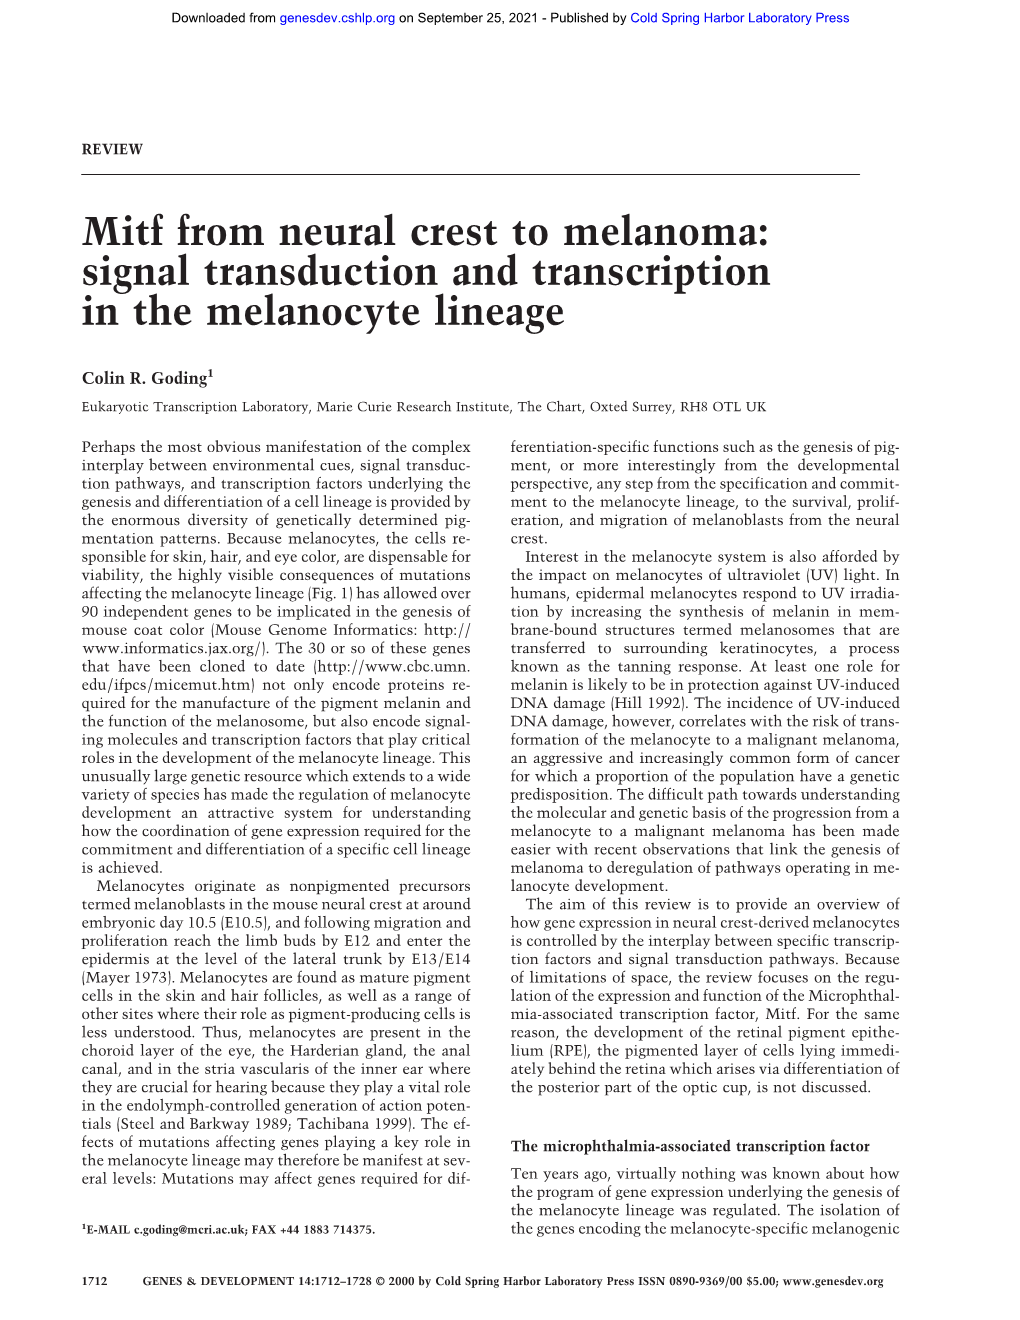 Mitf from Neural Crest to Melanoma: Signal Transduction and Transcription in the Melanocyte Lineage